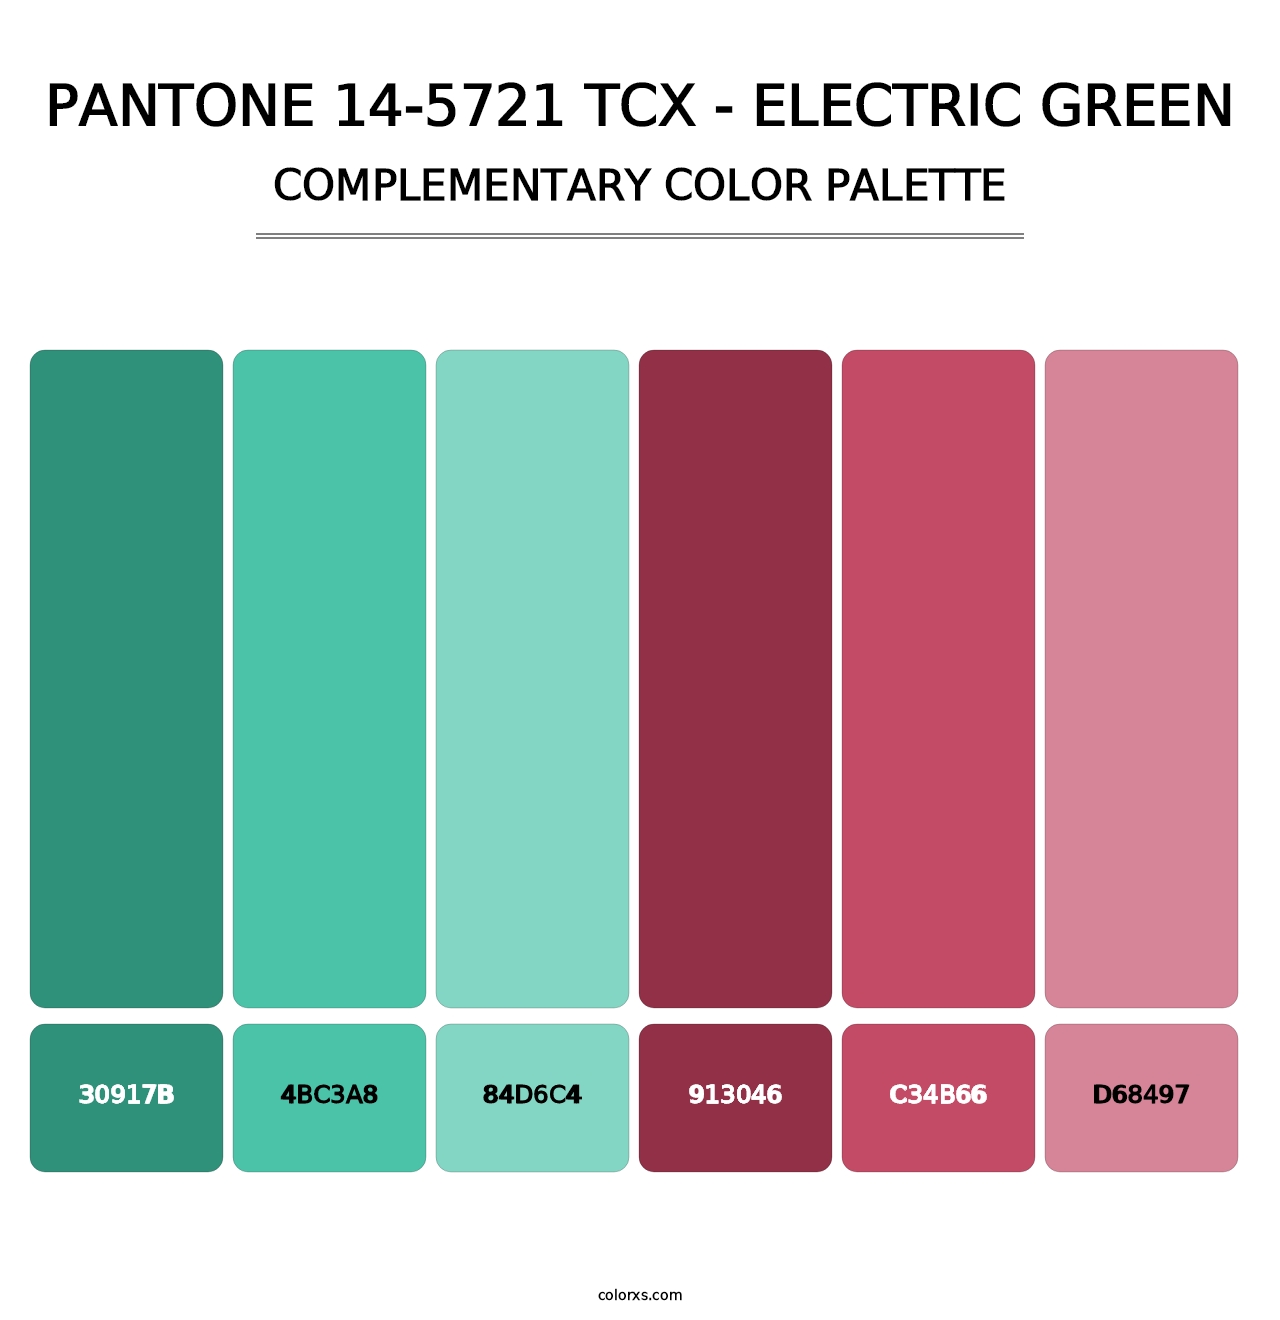 PANTONE 14-5721 TCX - Electric Green - Complementary Color Palette